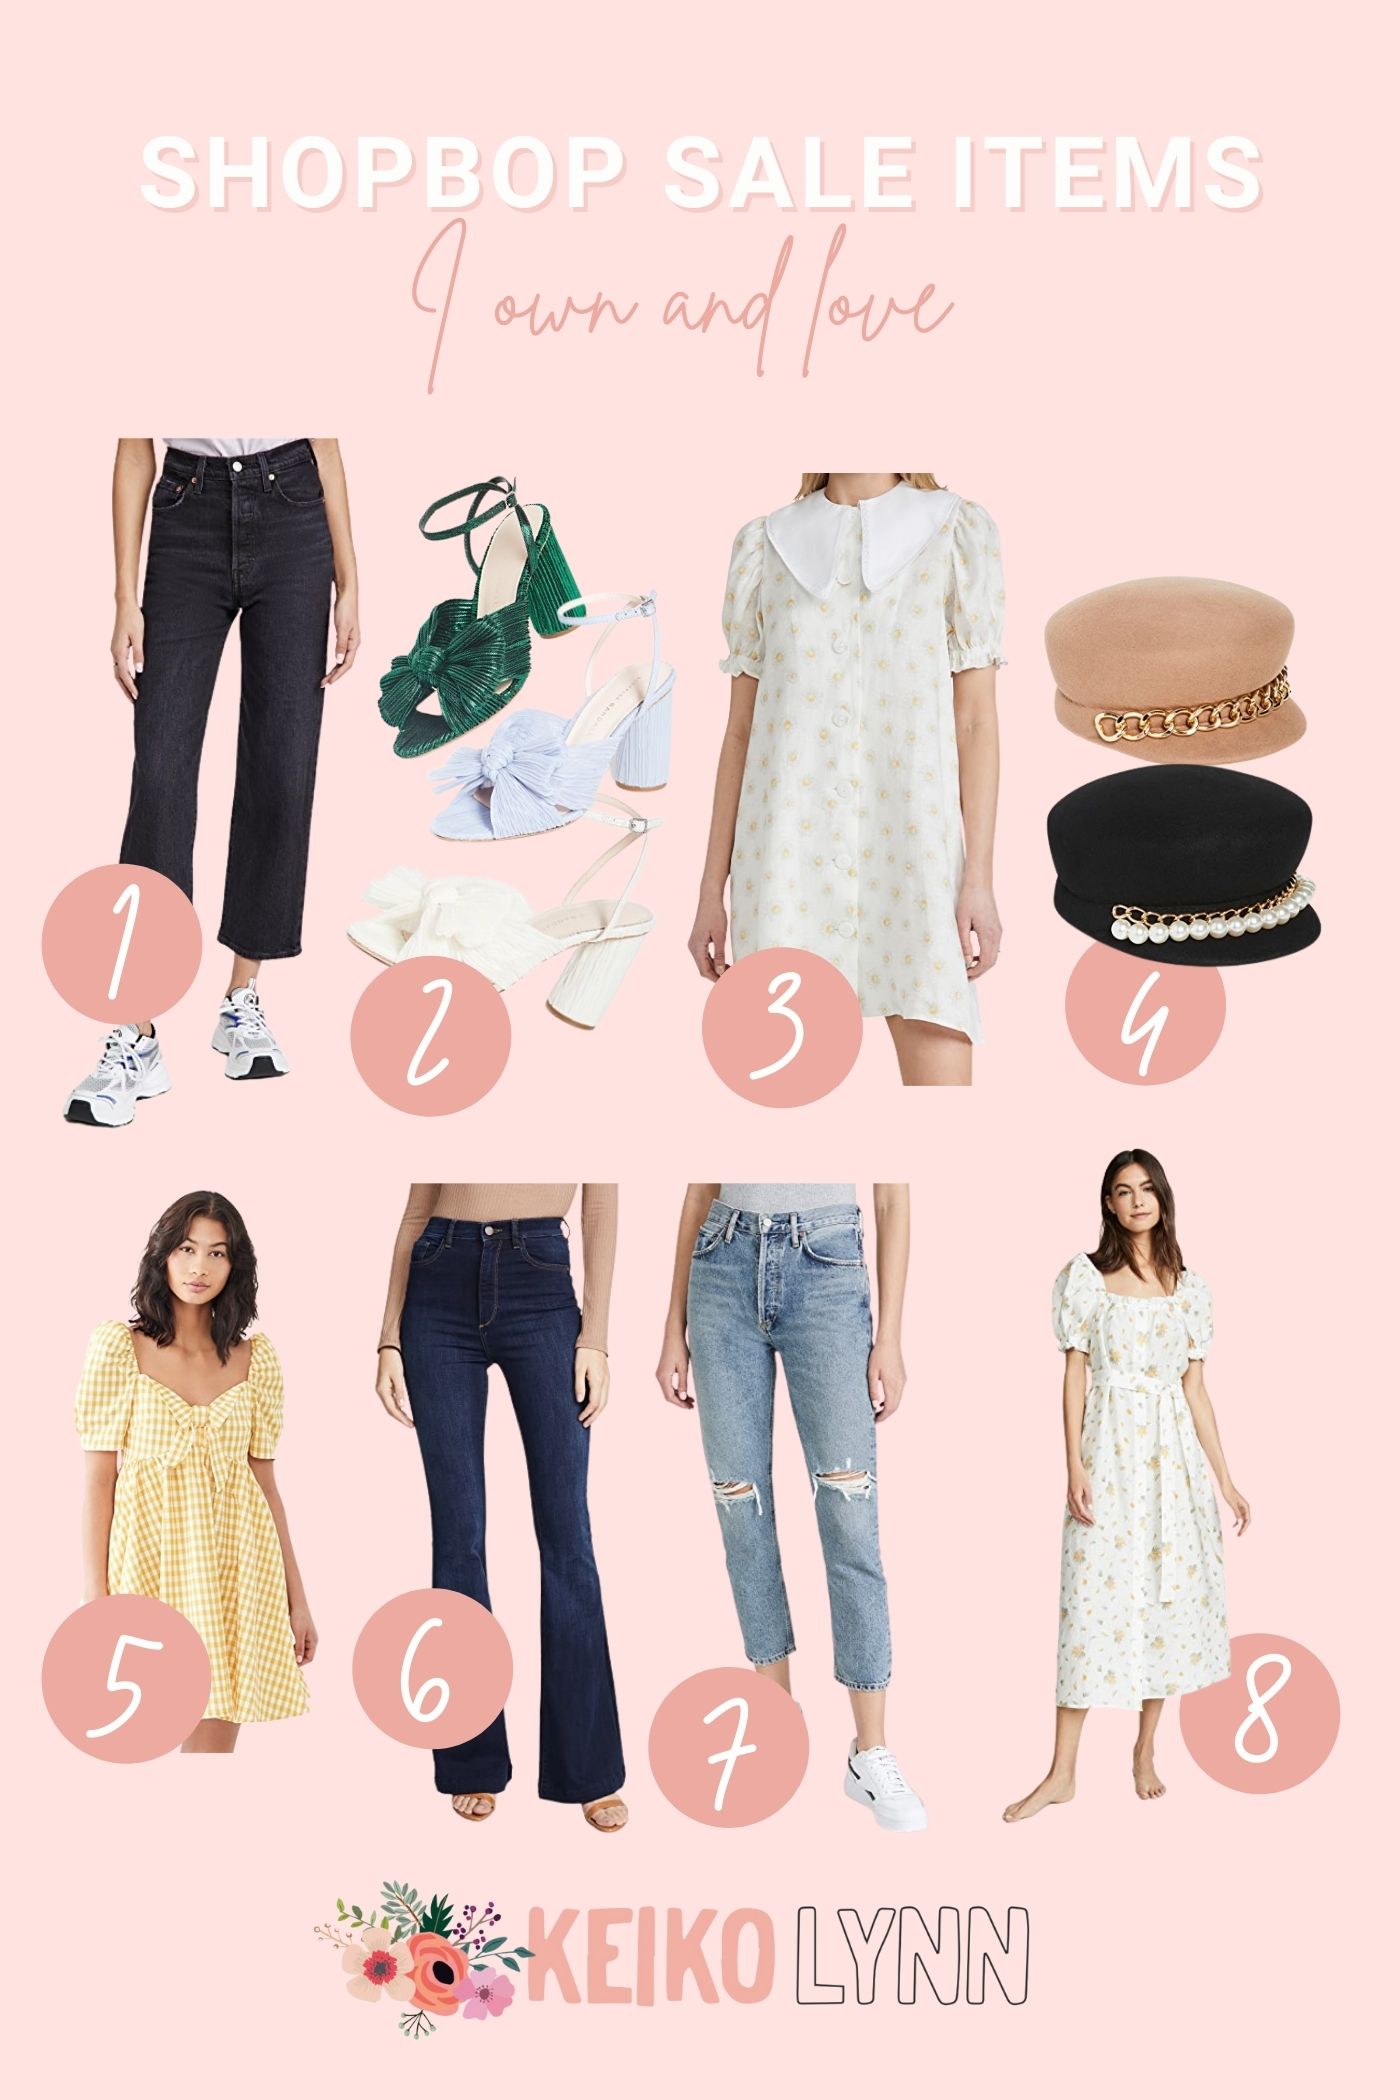 Shopbop sale items I own and love